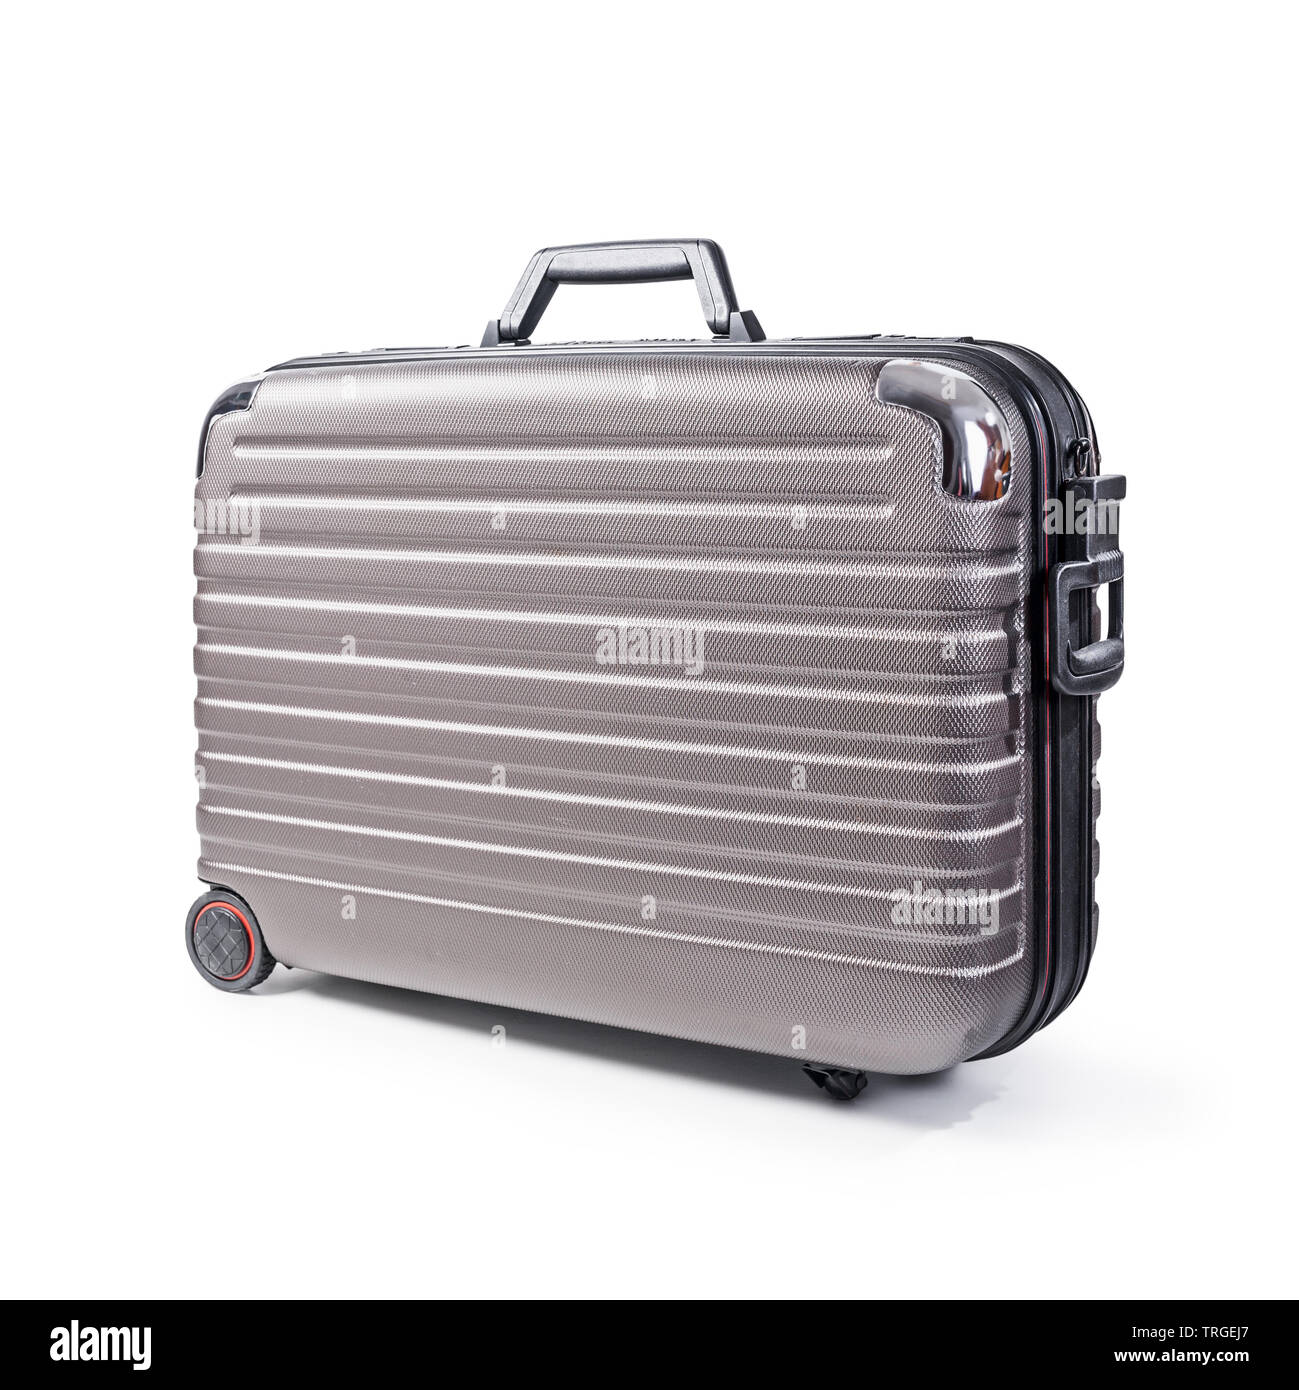 Suitcase isolated on white background clipping path included. Business travel and vacation concept Stock Photo